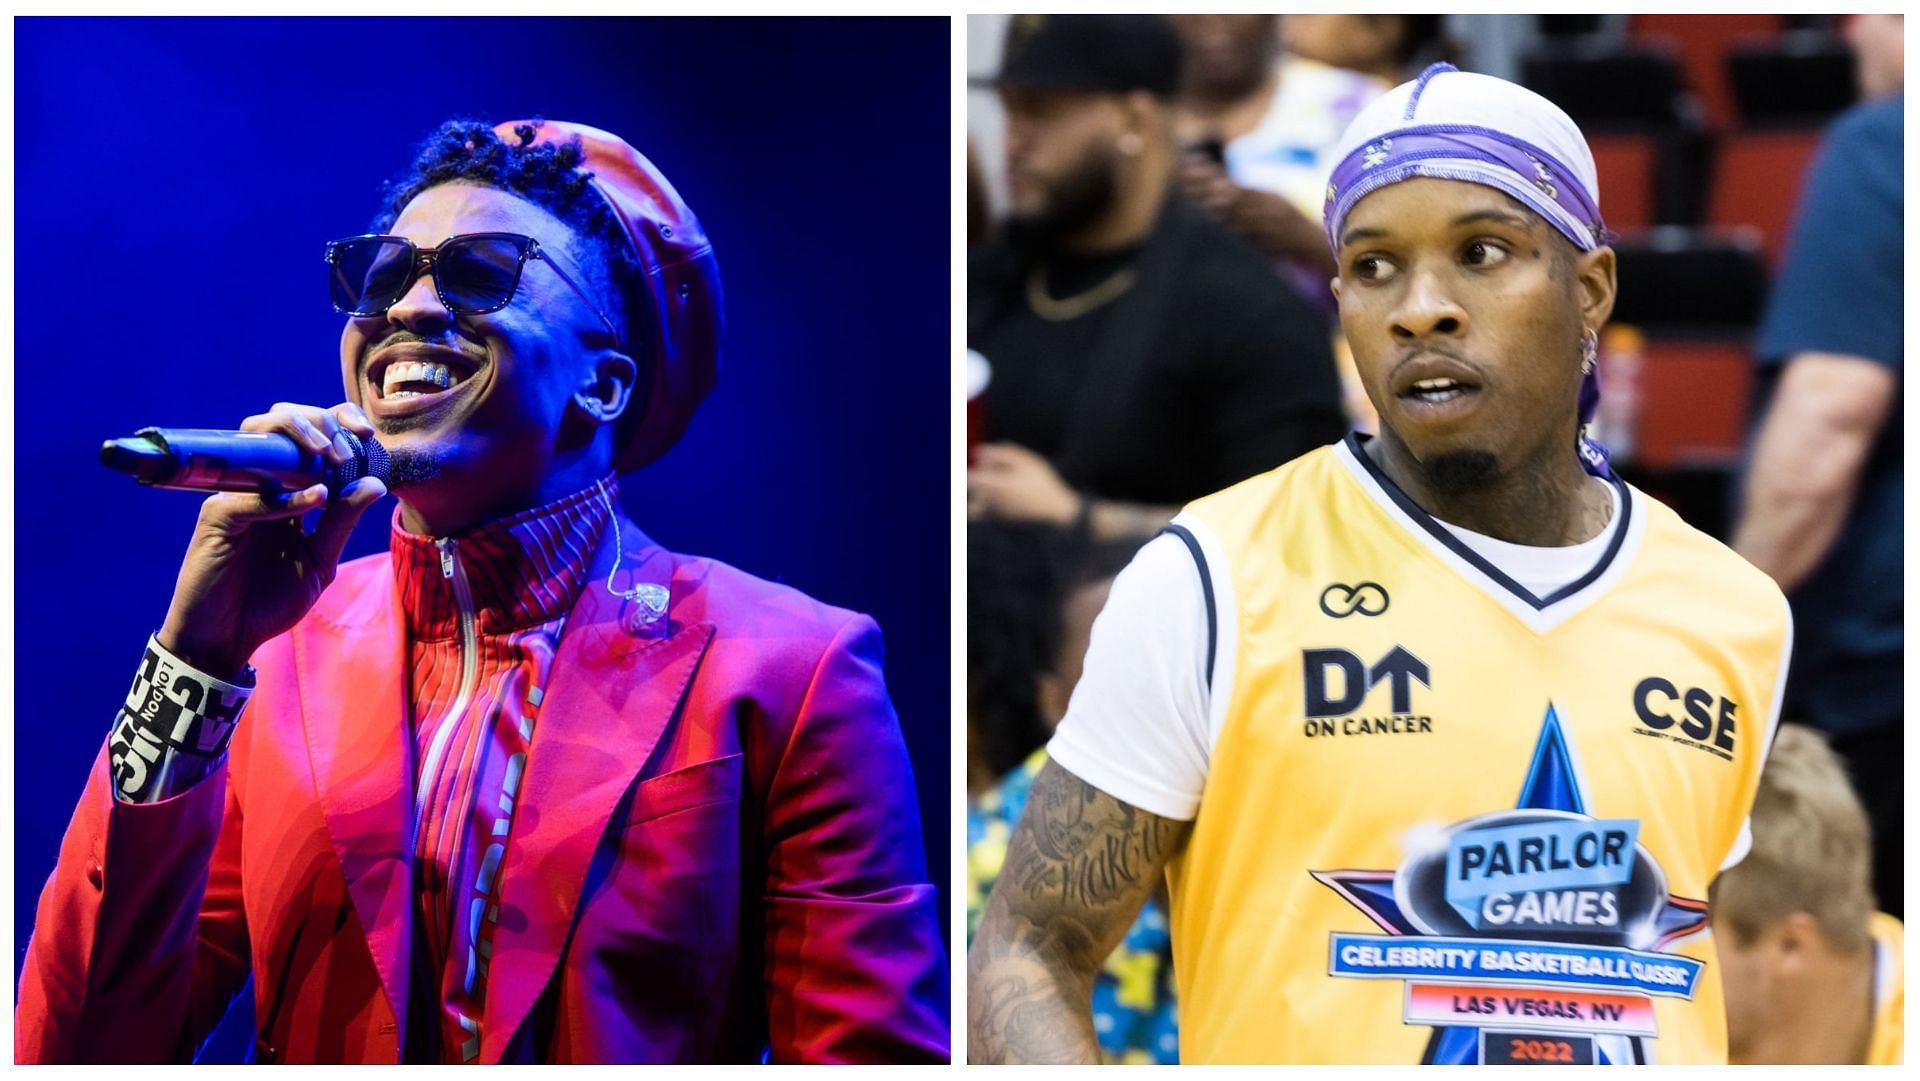 August Alsina accused Tory Lanez of attacking him with a group of people (Images via Joseph Okpako and Greg Doherty/Getty Images)